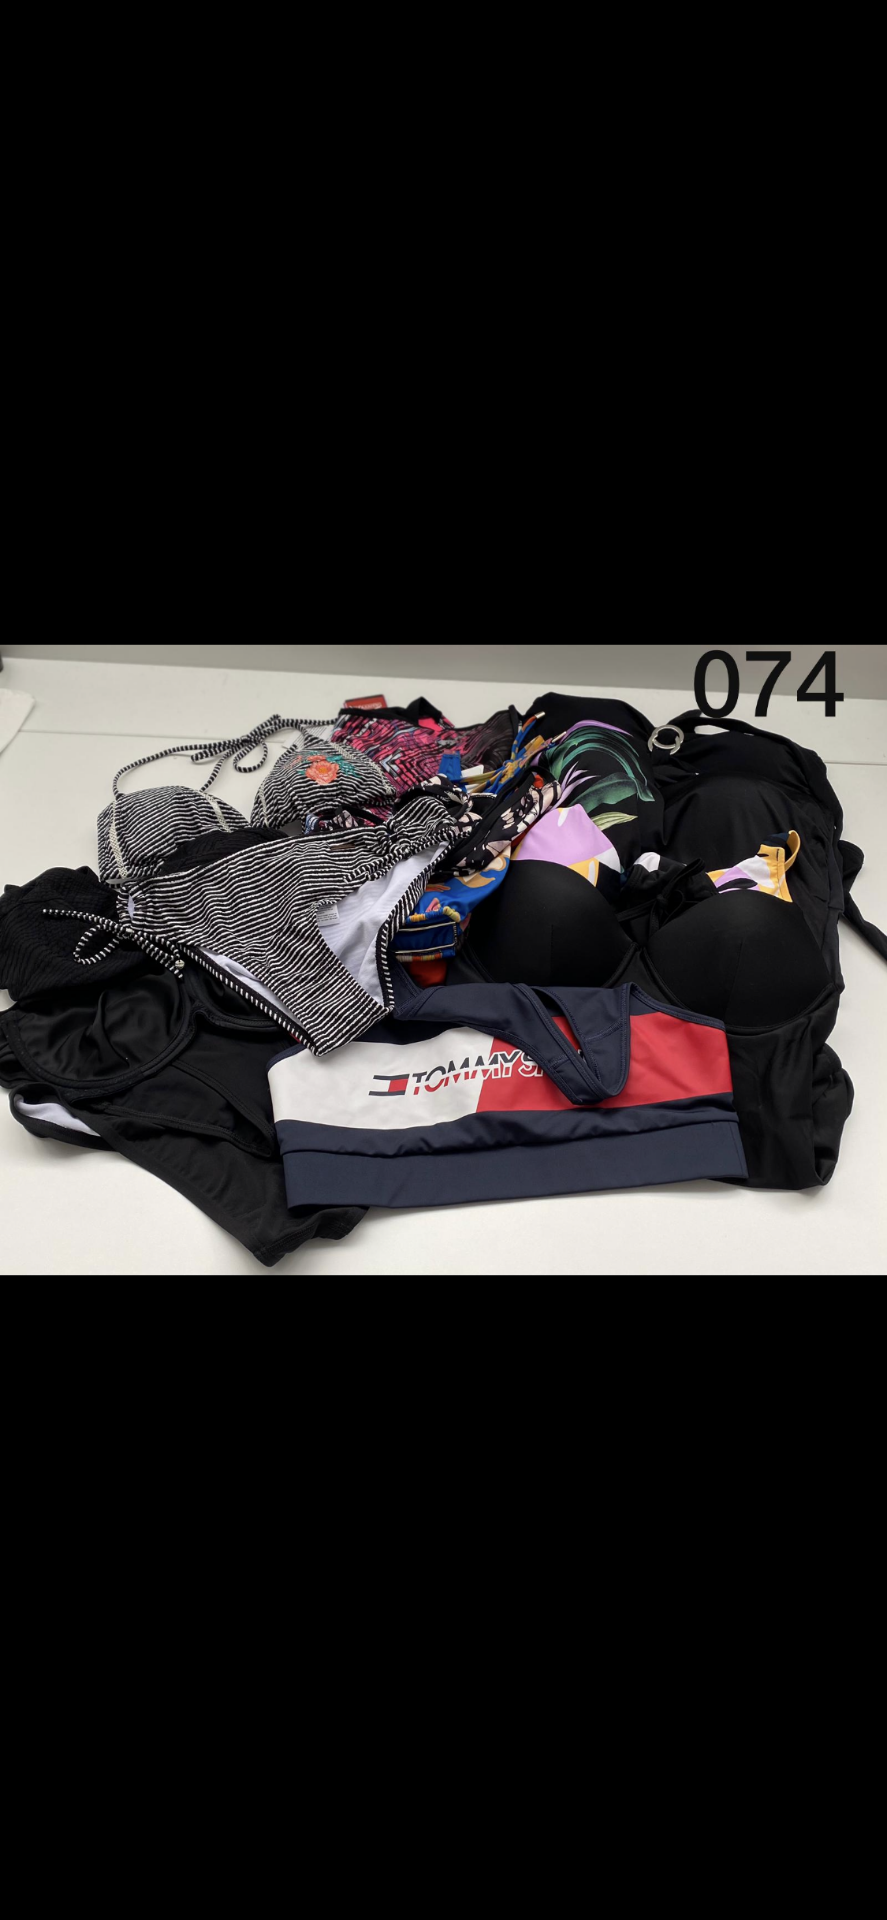 15 PIECE WOMENS SWIMWEAR LOT IN VARIOUS SIZES INCLUDING TOMMY HILFIGER, SLAZENGER AND FIRETRAP